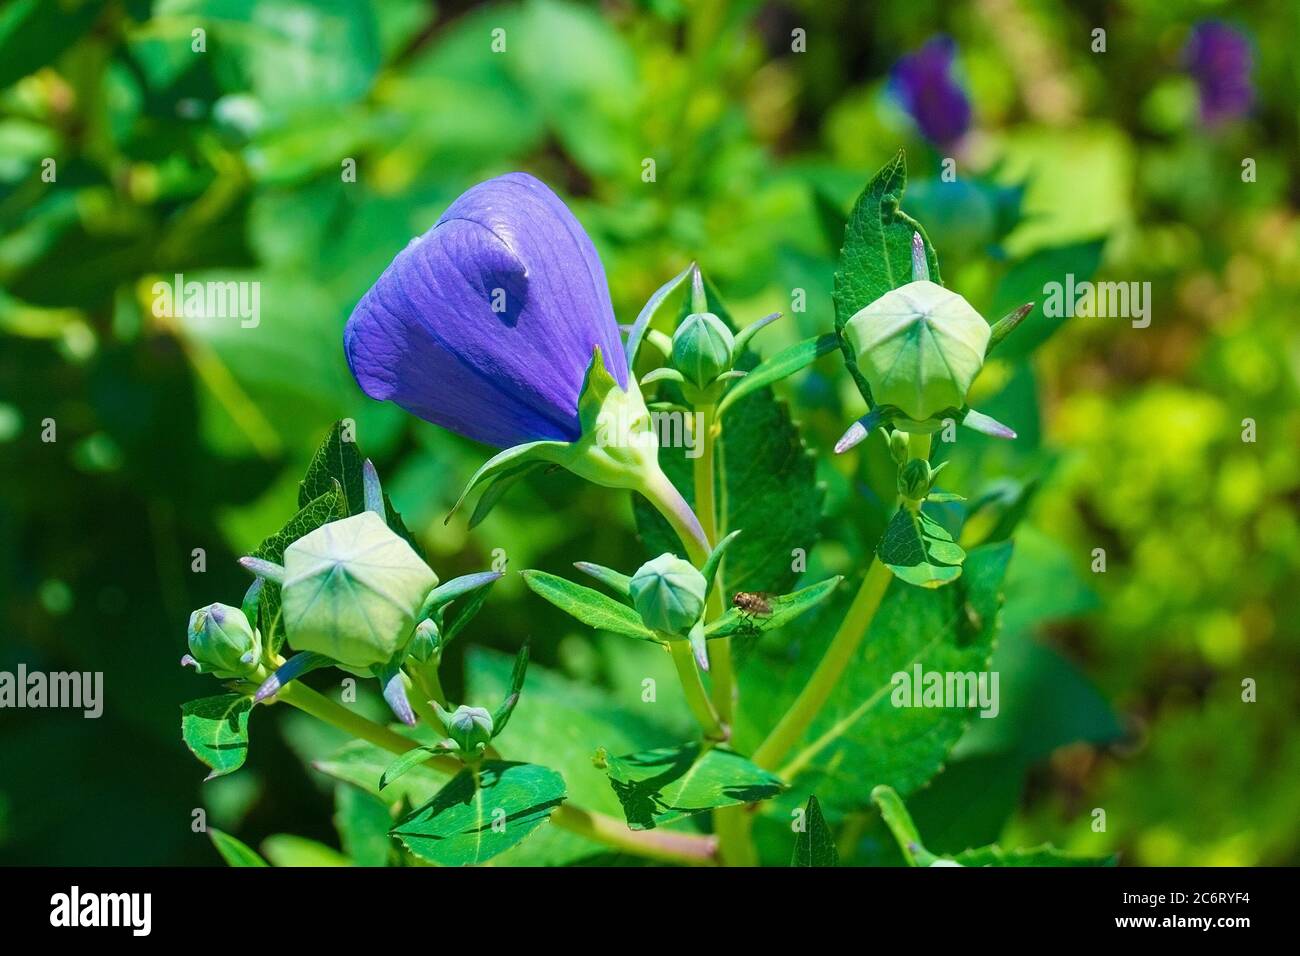 Flower buds on a perennial blue purple Campanula Carpatica plant from the Campanulaceae family, also known as the Tussock Bellflower, American Harebel Stock Photo